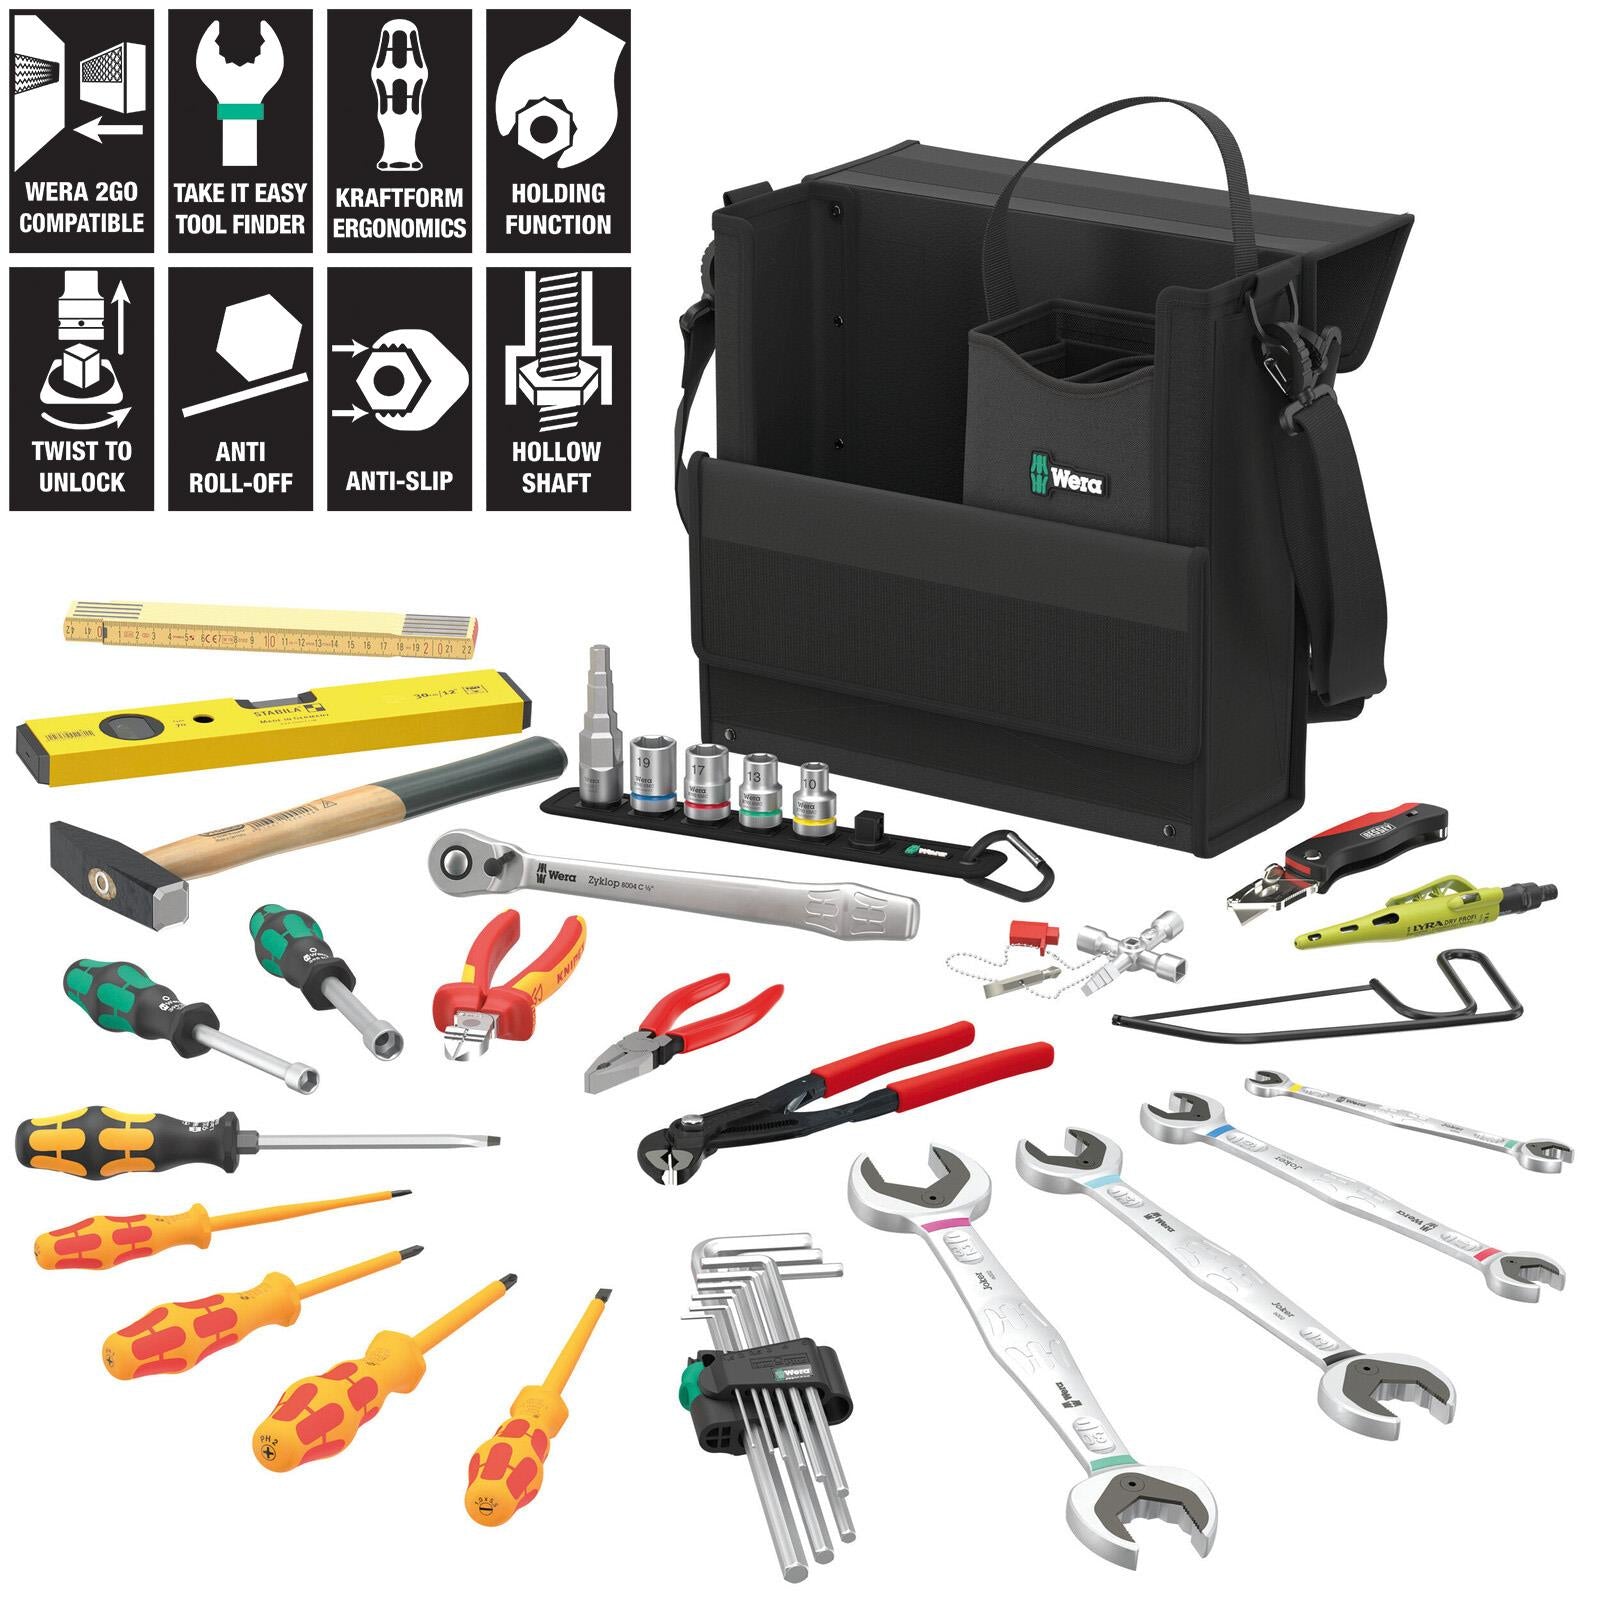 Wera Tool Kit for Plumbing Heating and Air Conditioning Wera 2go SHK 1 Tool Set 36 Pieces